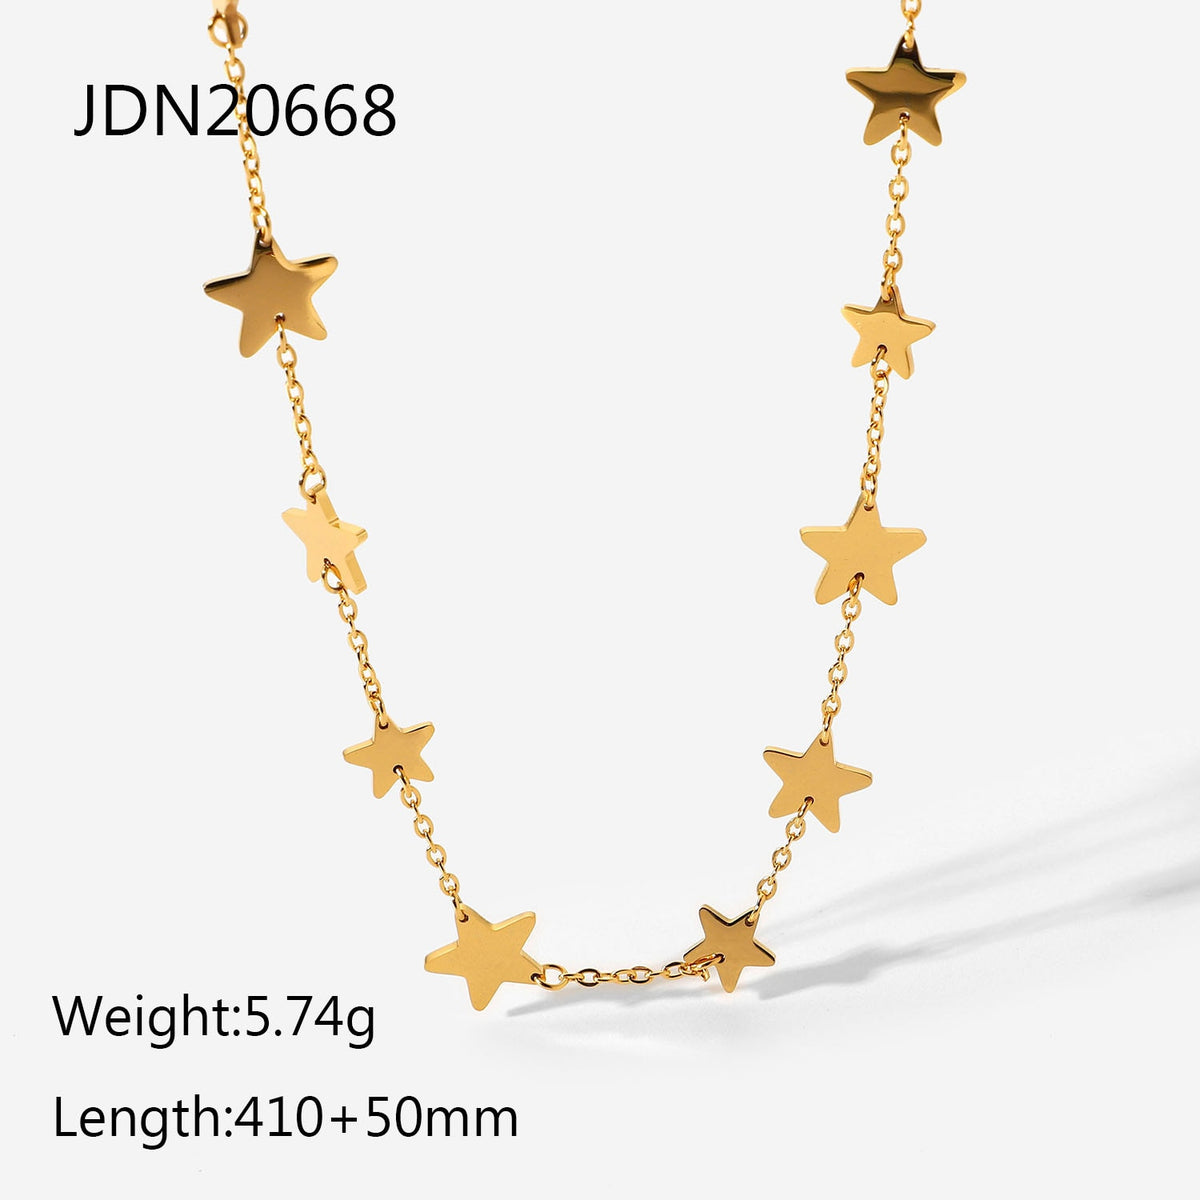 Fancy Star Charm Stainless Steel Necklace Statement Hip Pop Jewelry 18k Gold PVD Plated Choker Clavicle Chain Necklace Women